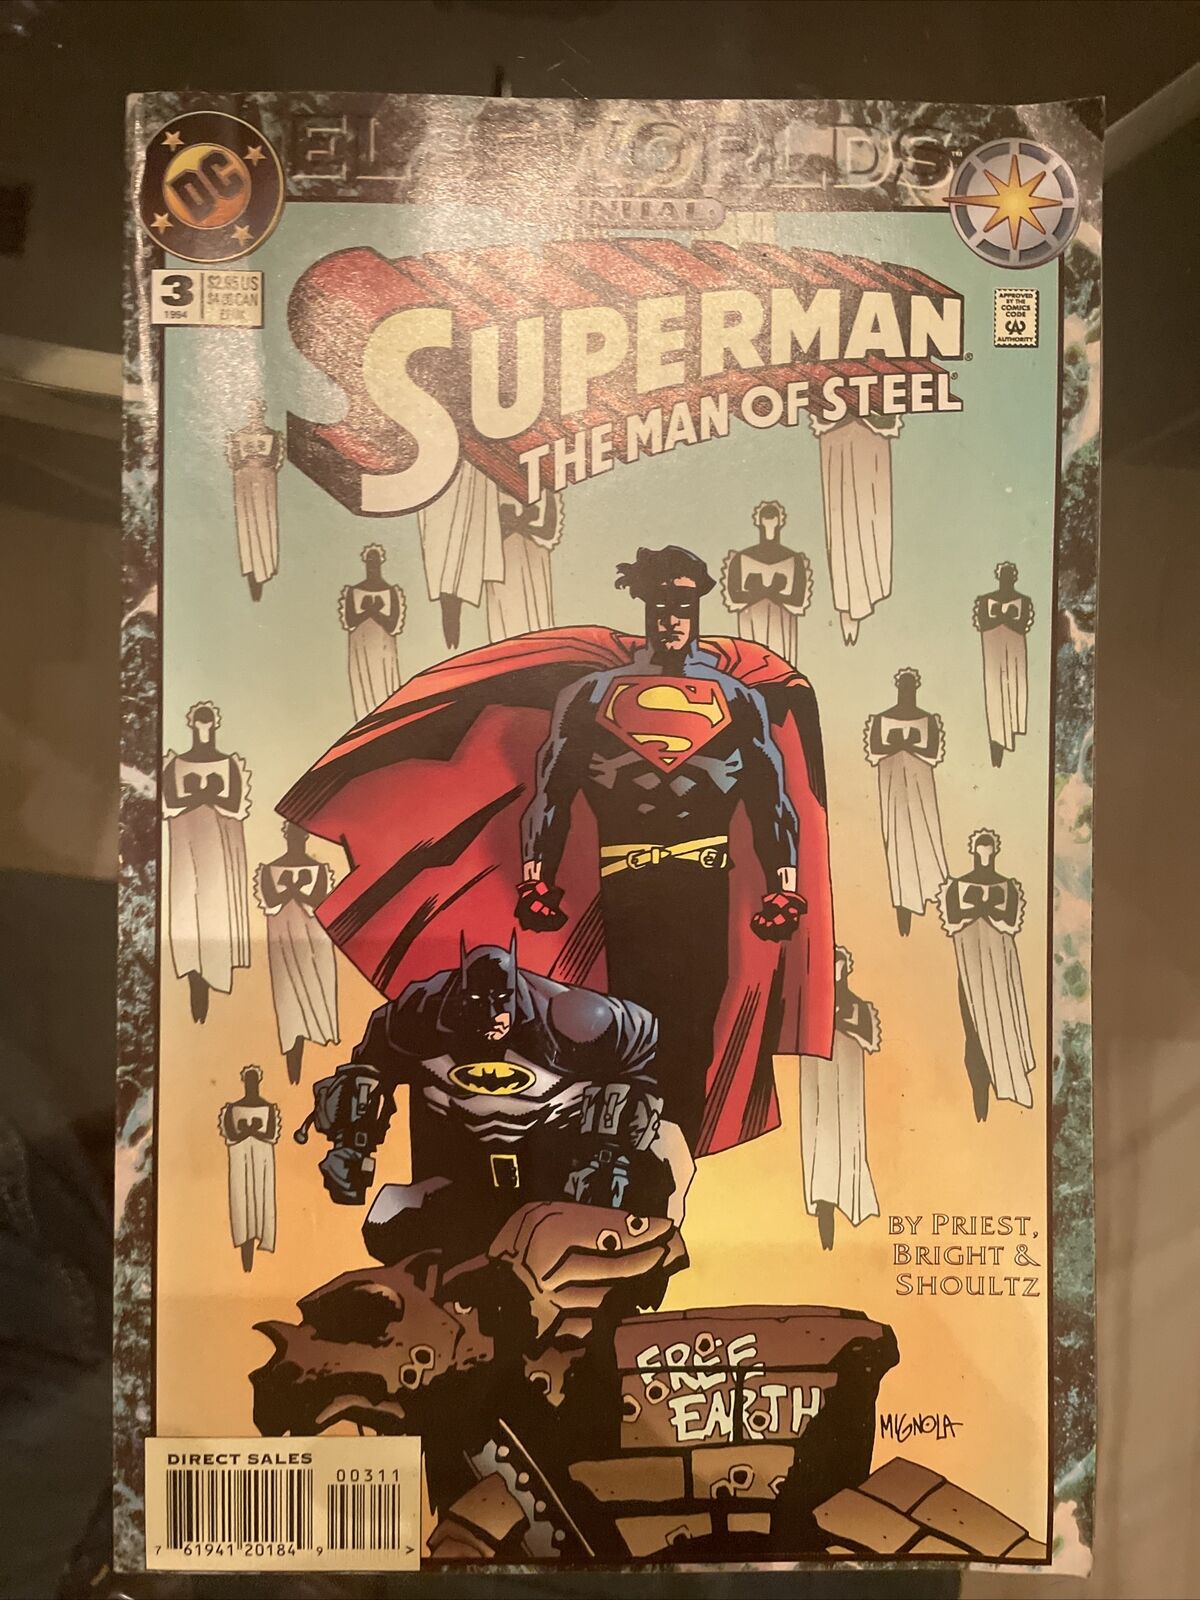 Superman: The Man of Steel Annual # 3